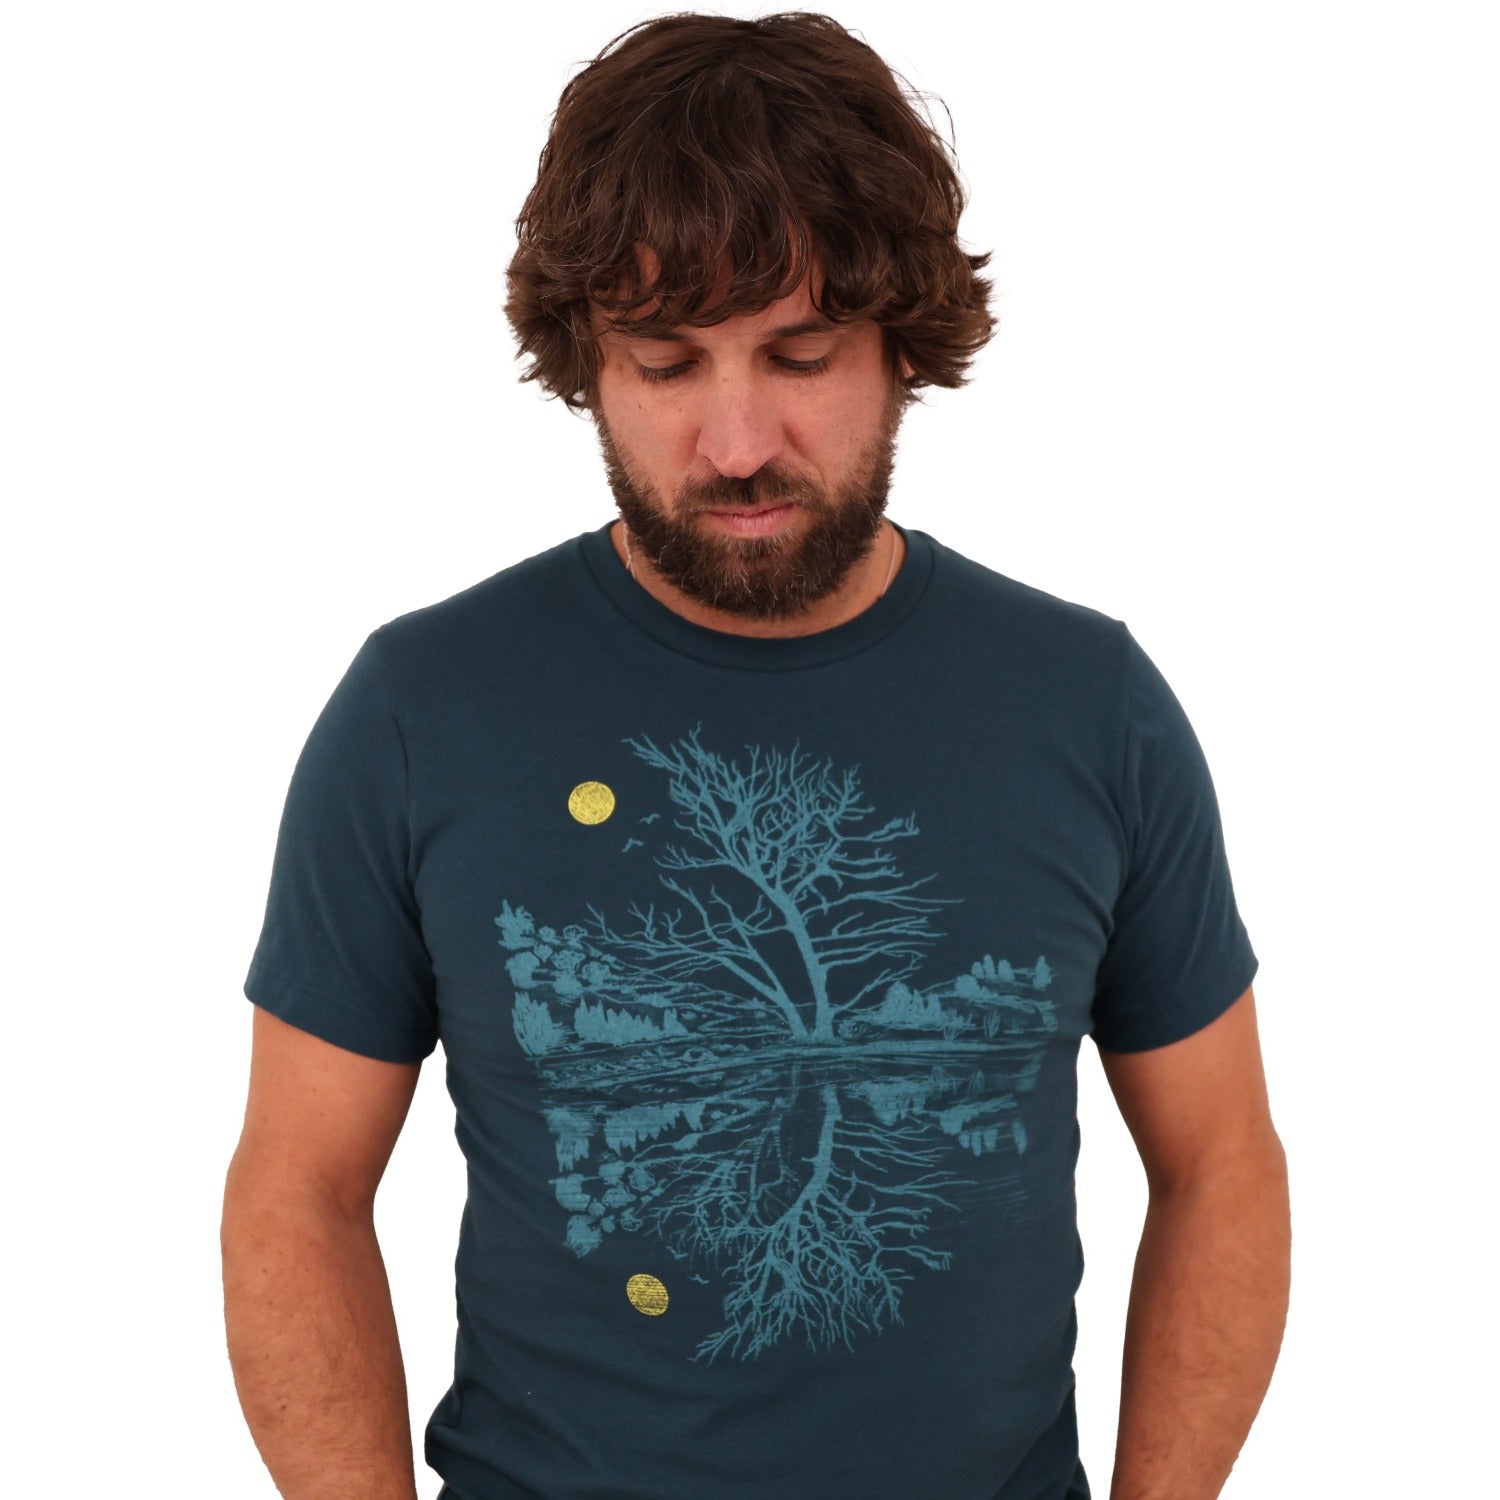 Man wearing atlantic blue t-shirt. Print is in a light blue tree & reflection over water with a yellow moon.